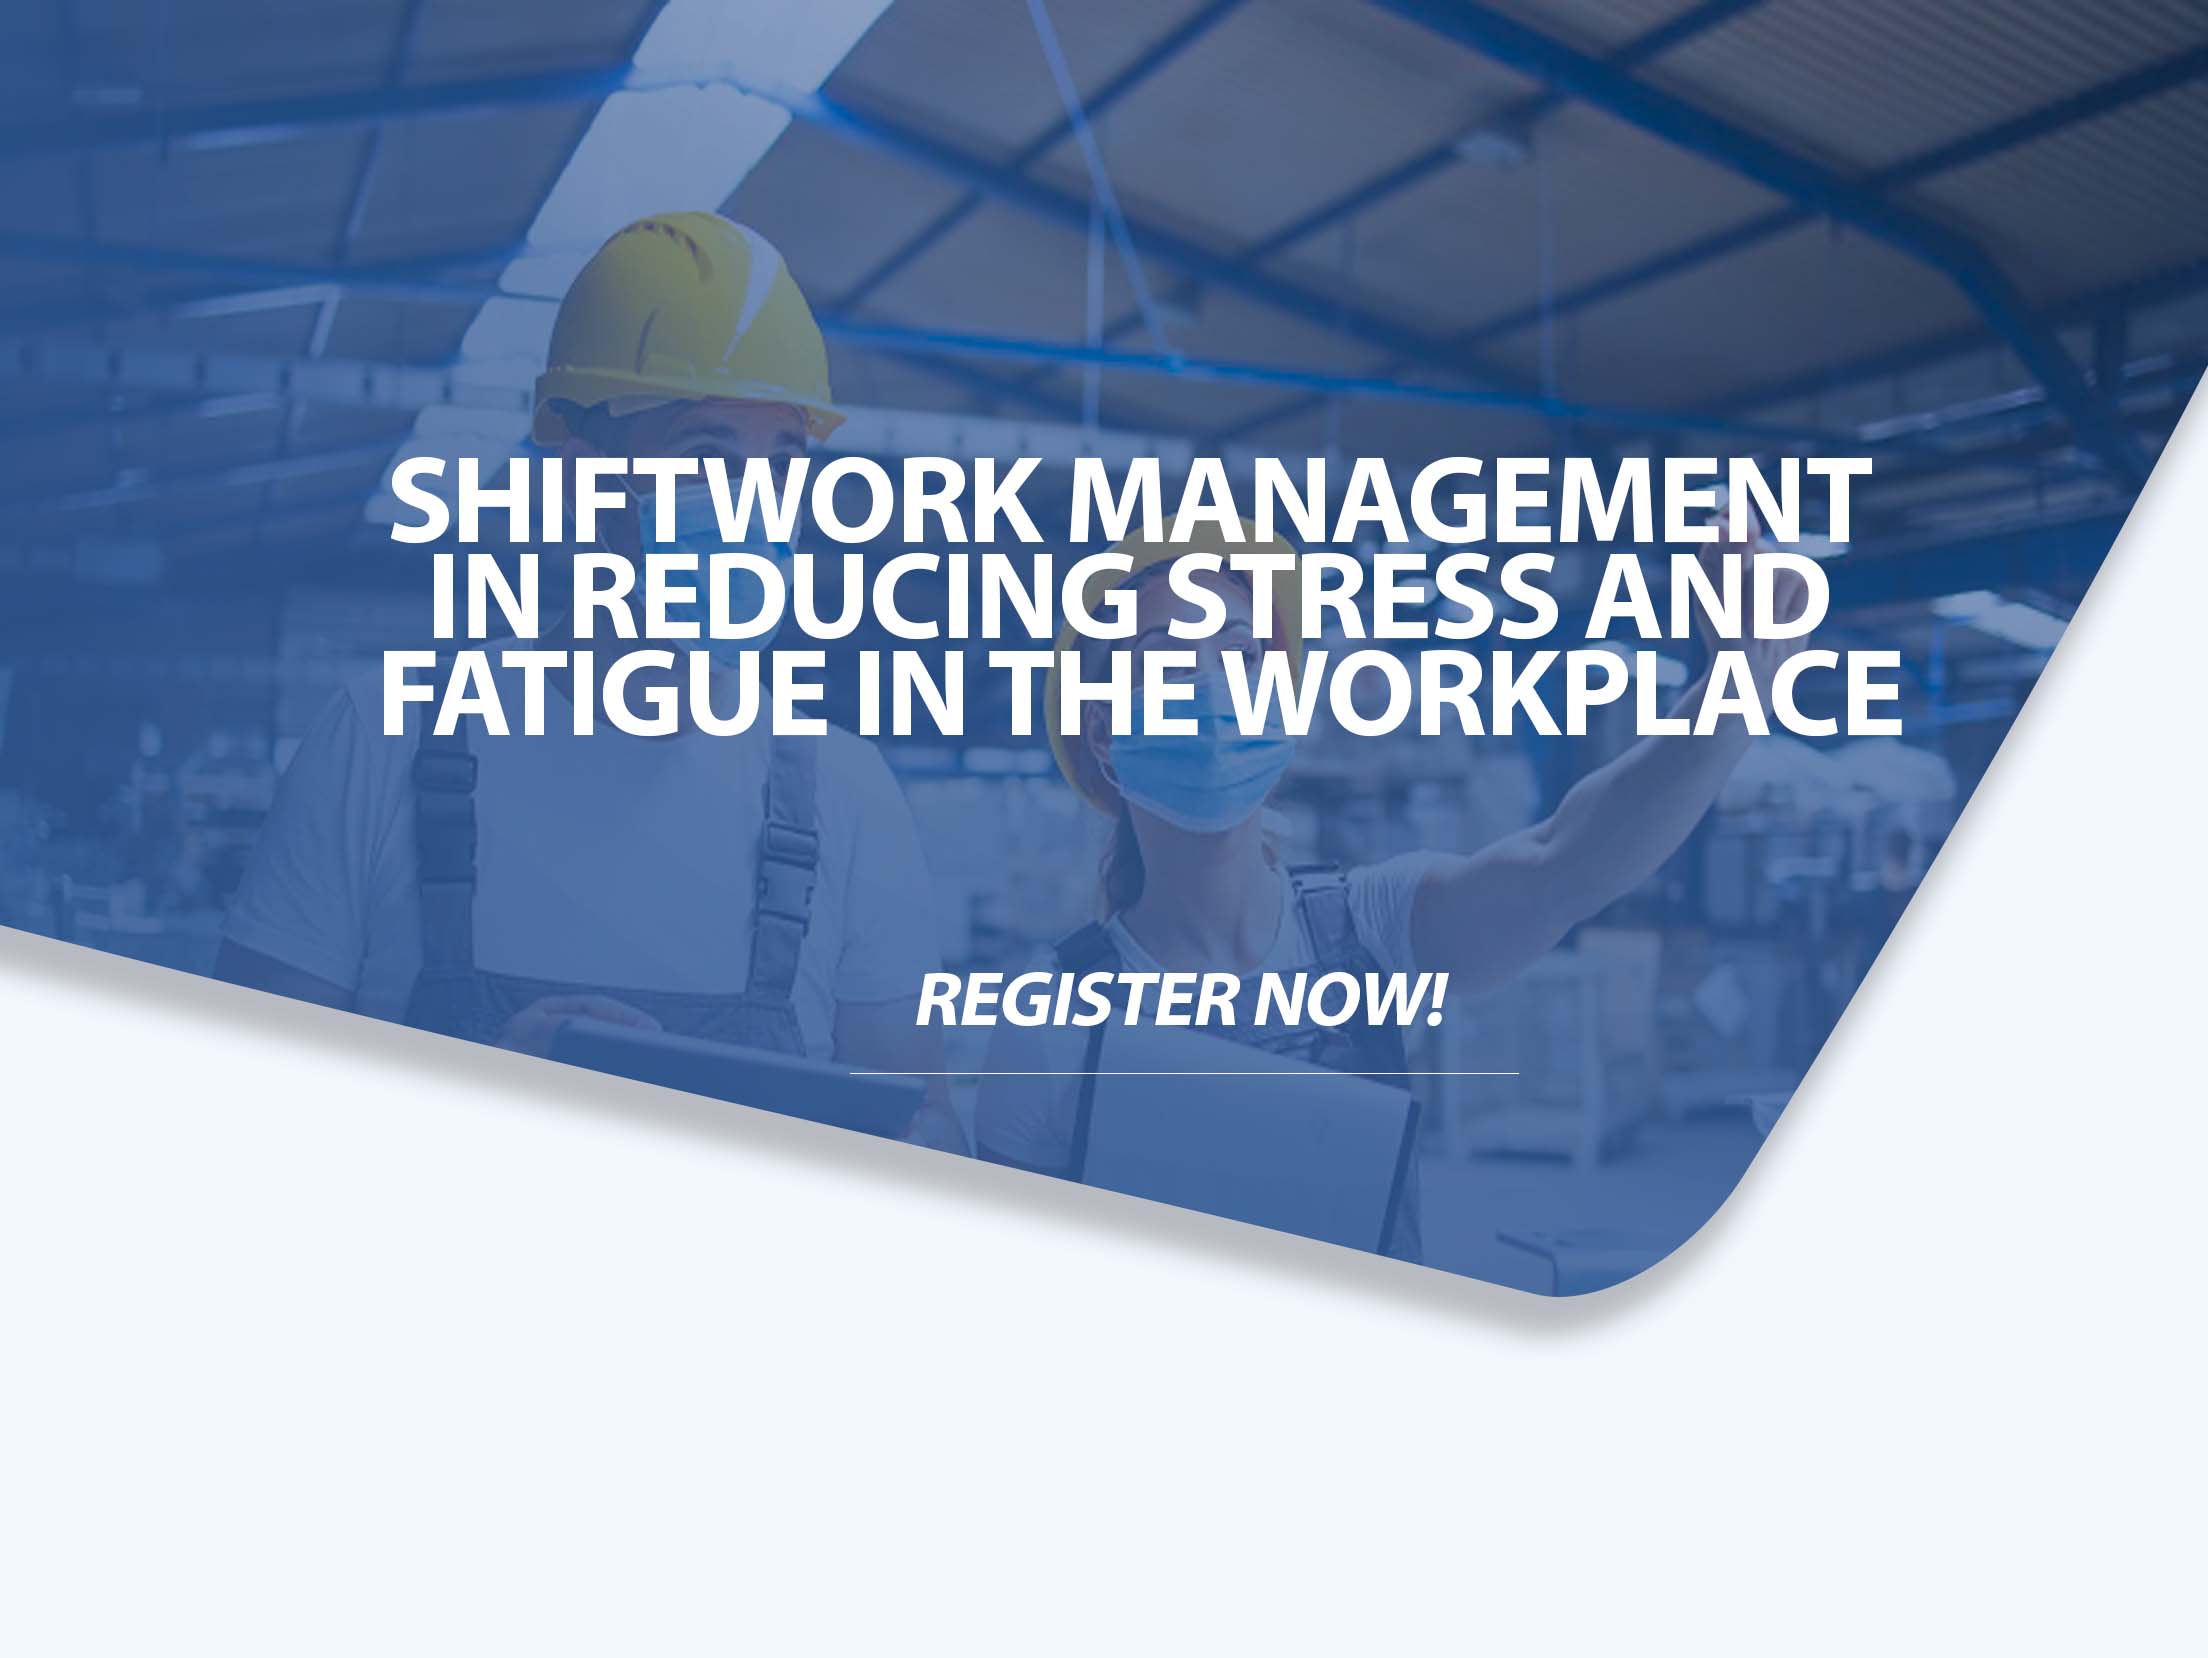 Shiftwork Management in reducing Stress and Fatigue in the Workplace